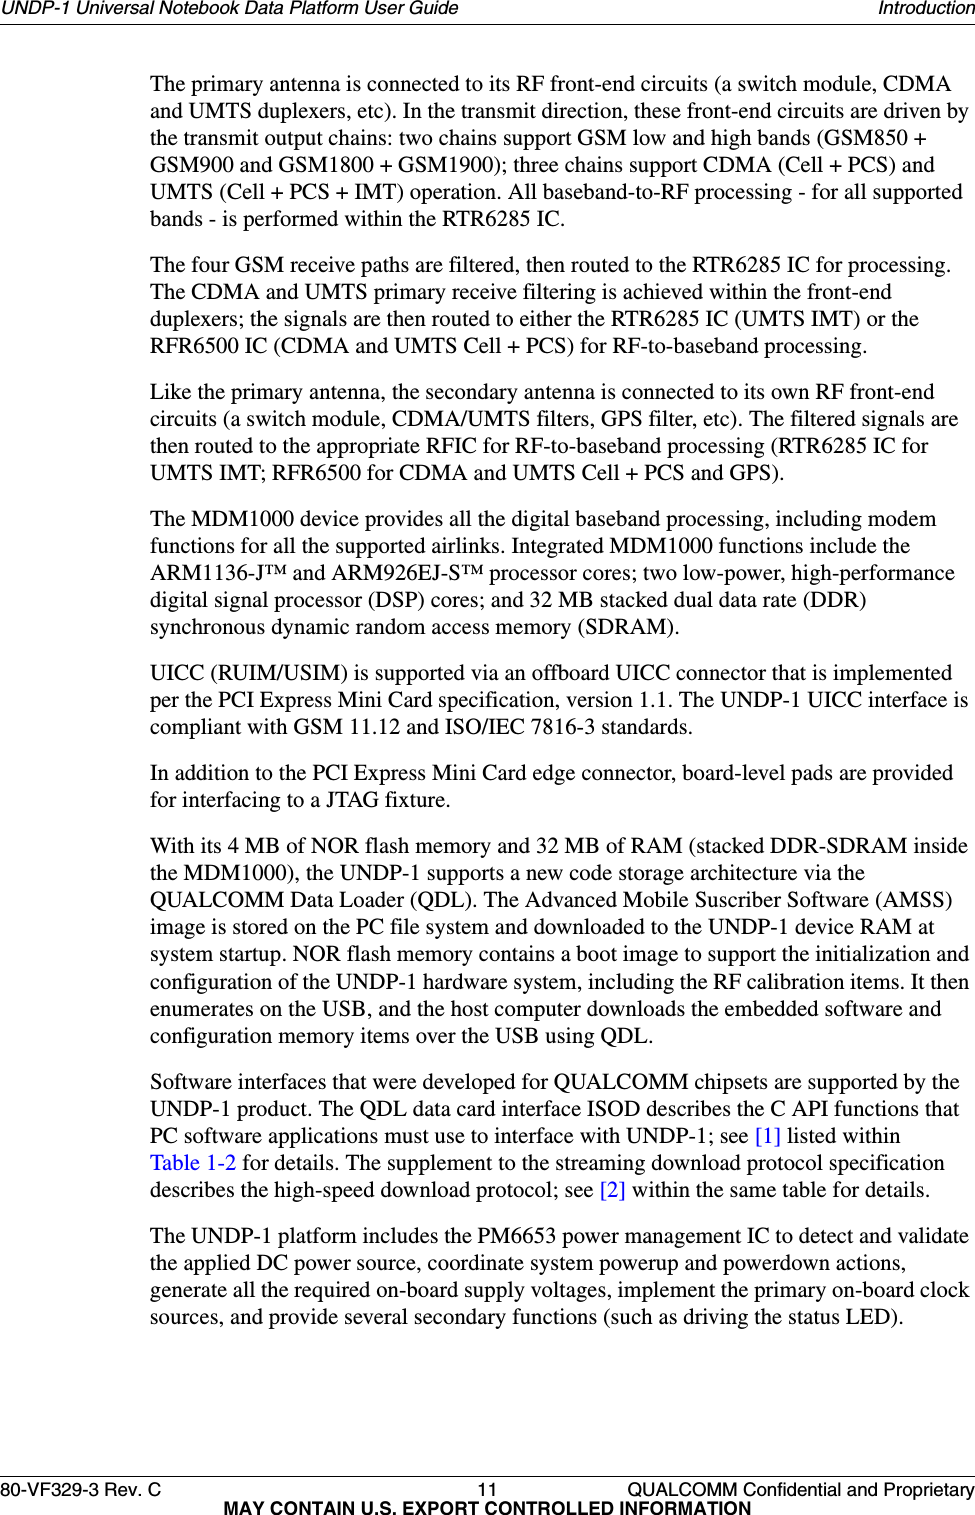 80-VF329-3 Rev. C 11 QUALCOMM Confidential and ProprietaryMAY CONTAIN U.S. EXPORT CONTROLLED INFORMATIONUNDP-1 Universal Notebook Data Platform User Guide IntroductionThe primary antenna is connected to its RF front-end circuits (a switch module, CDMA and UMTS duplexers, etc). In the transmit direction, these front-end circuits are driven by the transmit output chains: two chains support GSM low and high bands (GSM850 + GSM900 and GSM1800 + GSM1900); three chains support CDMA (Cell + PCS) and UMTS (Cell + PCS + IMT) operation. All baseband-to-RF processing - for all supported bands - is performed within the RTR6285 IC.The four GSM receive paths are filtered, then routed to the RTR6285 IC for processing. The CDMA and UMTS primary receive filtering is achieved within the front-end duplexers; the signals are then routed to either the RTR6285 IC (UMTS IMT) or the RFR6500 IC (CDMA and UMTS Cell + PCS) for RF-to-baseband processing.Like the primary antenna, the secondary antenna is connected to its own RF front-end circuits (a switch module, CDMA/UMTS filters, GPS filter, etc). The filtered signals are then routed to the appropriate RFIC for RF-to-baseband processing (RTR6285 IC for UMTS IMT; RFR6500 for CDMA and UMTS Cell + PCS and GPS).The MDM1000 device provides all the digital baseband processing, including modem functions for all the supported airlinks. Integrated MDM1000 functions include the ARM1136-J™ and ARM926EJ-S™ processor cores; two low-power, high-performance digital signal processor (DSP) cores; and 32 MB stacked dual data rate (DDR) synchronous dynamic random access memory (SDRAM). UICC (RUIM/USIM) is supported via an offboard UICC connector that is implemented per the PCI Express Mini Card specification, version 1.1. The UNDP-1 UICC interface is compliant with GSM 11.12 and ISO/IEC 7816-3 standards.In addition to the PCI Express Mini Card edge connector, board-level pads are provided for interfacing to a JTAG fixture. With its 4 MB of NOR flash memory and 32 MB of RAM (stacked DDR-SDRAM inside the MDM1000), the UNDP-1 supports a new code storage architecture via the QUALCOMM Data Loader (QDL). The Advanced Mobile Suscriber Software (AMSS) image is stored on the PC file system and downloaded to the UNDP-1 device RAM at system startup. NOR flash memory contains a boot image to support the initialization and configuration of the UNDP-1 hardware system, including the RF calibration items. It then enumerates on the USB, and the host computer downloads the embedded software and configuration memory items over the USB using QDL.Software interfaces that were developed for QUALCOMM chipsets are supported by the UNDP-1 product. The QDL data card interface ISOD describes the C API functions that PC software applications must use to interface with UNDP-1; see [1] listed within Table 1-2 for details. The supplement to the streaming download protocol specification describes the high-speed download protocol; see [2] within the same table for details.The UNDP-1 platform includes the PM6653 power management IC to detect and validate the applied DC power source, coordinate system powerup and powerdown actions, generate all the required on-board supply voltages, implement the primary on-board clock sources, and provide several secondary functions (such as driving the status LED).